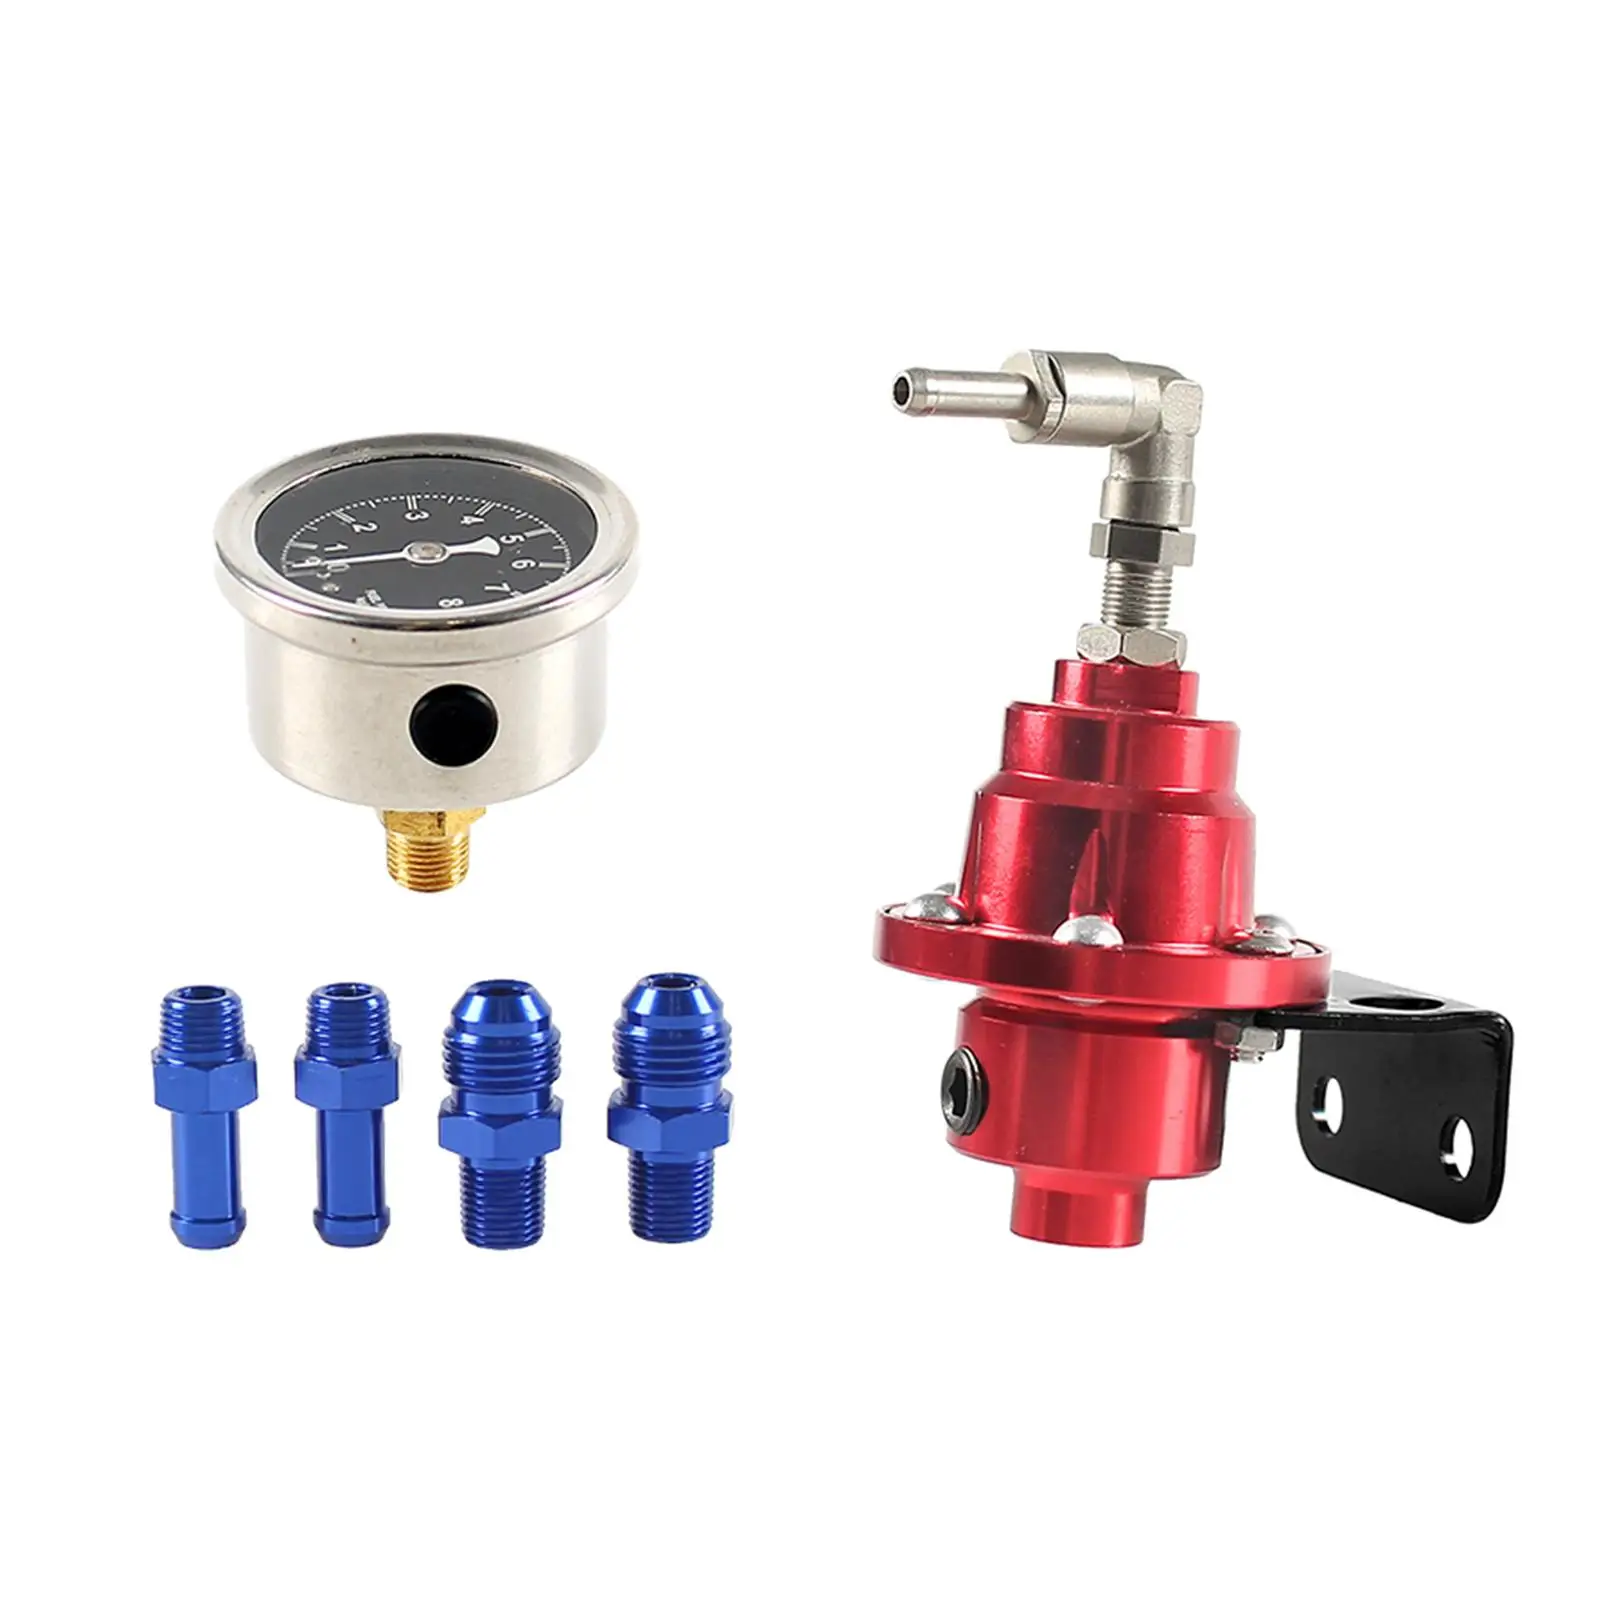 Universal Adjustable Fuel Pressure Regulator with Gauge Automotive Accessories Replace Parts with 4 Connectors 200-800Kpa